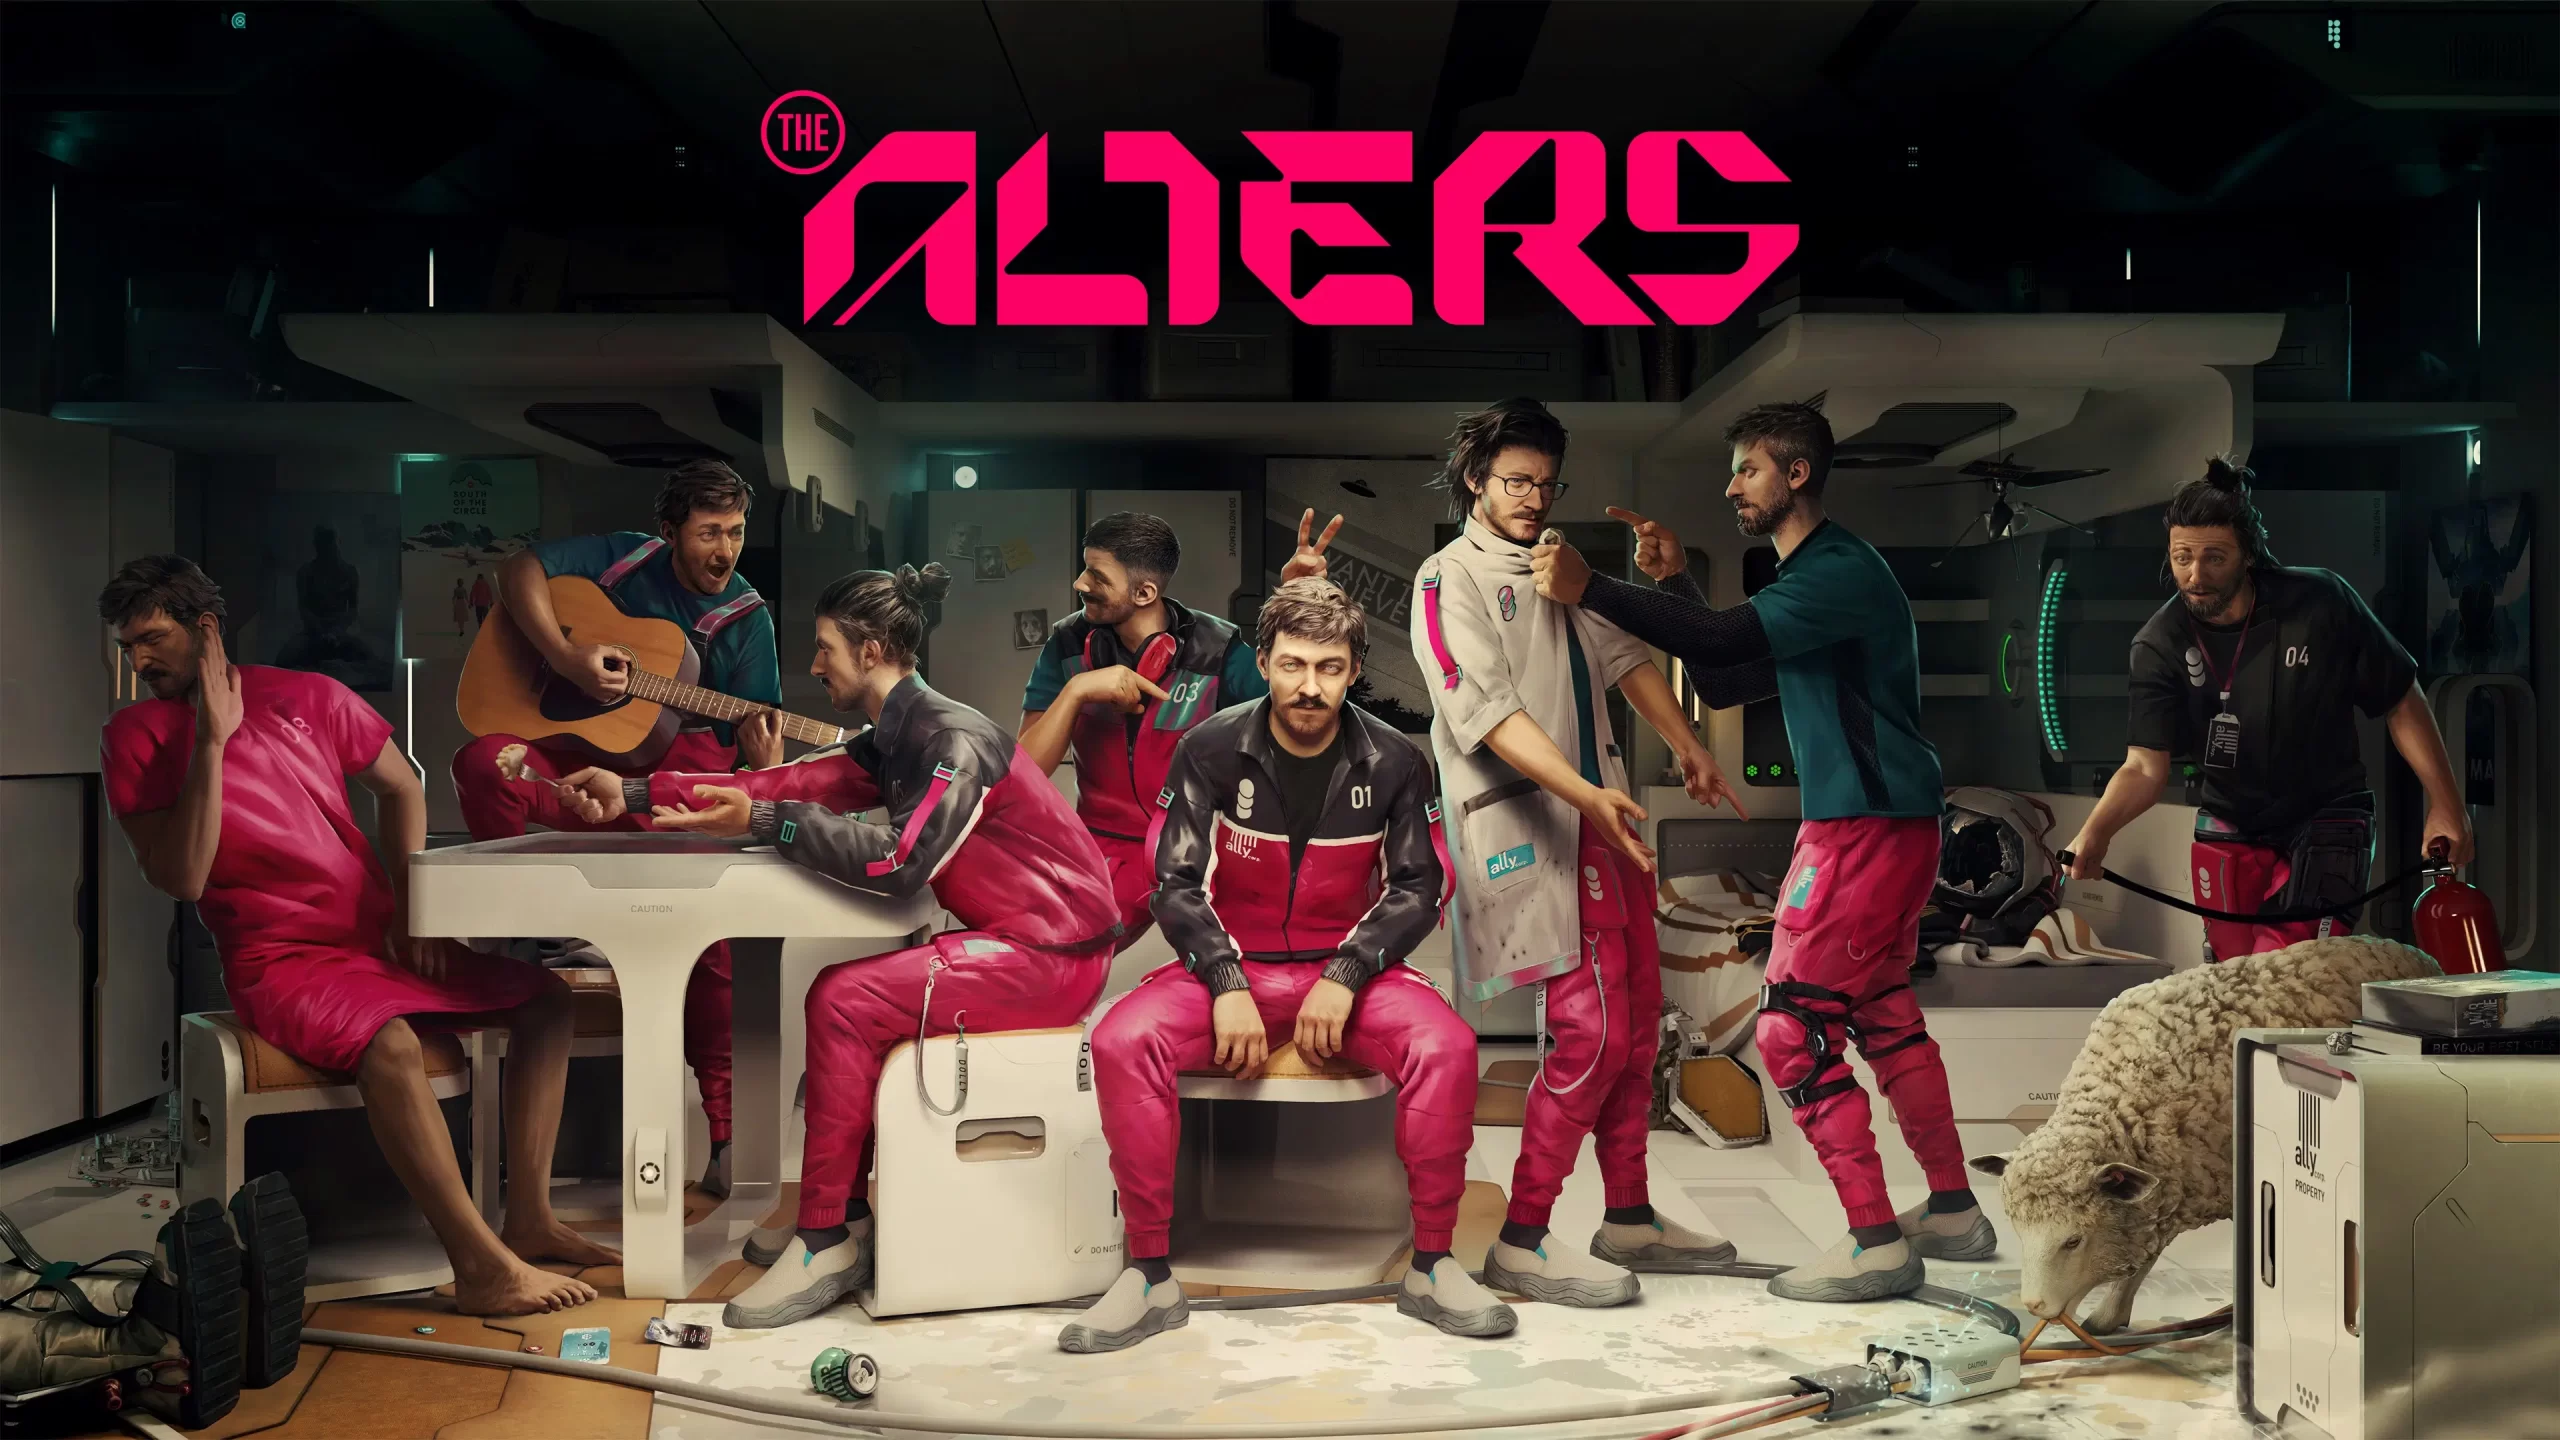 TheAlters